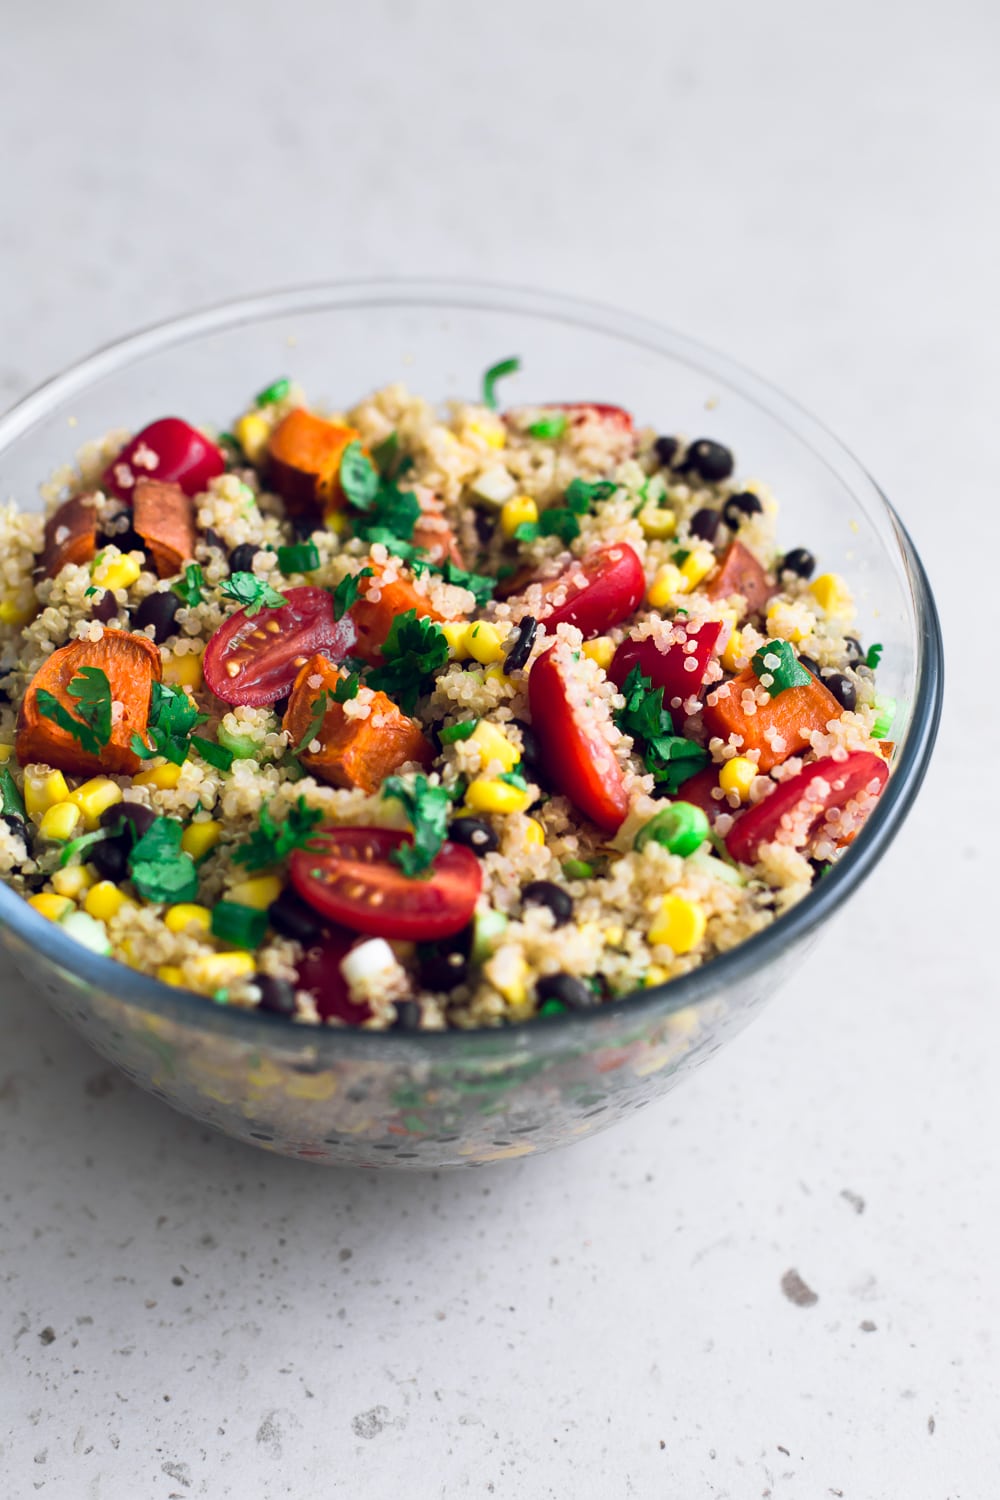 Vegan Detox Quinoa Salad - a healthy, vibrant and delicious salad studded with lots of veggies and dressed in a Lime and Cumin Dressing. Gluten Free. #vegan #quinoa #healthy #sweetpotato #blackbeans #salad #lime #cumin #mexican #healthyrecipes